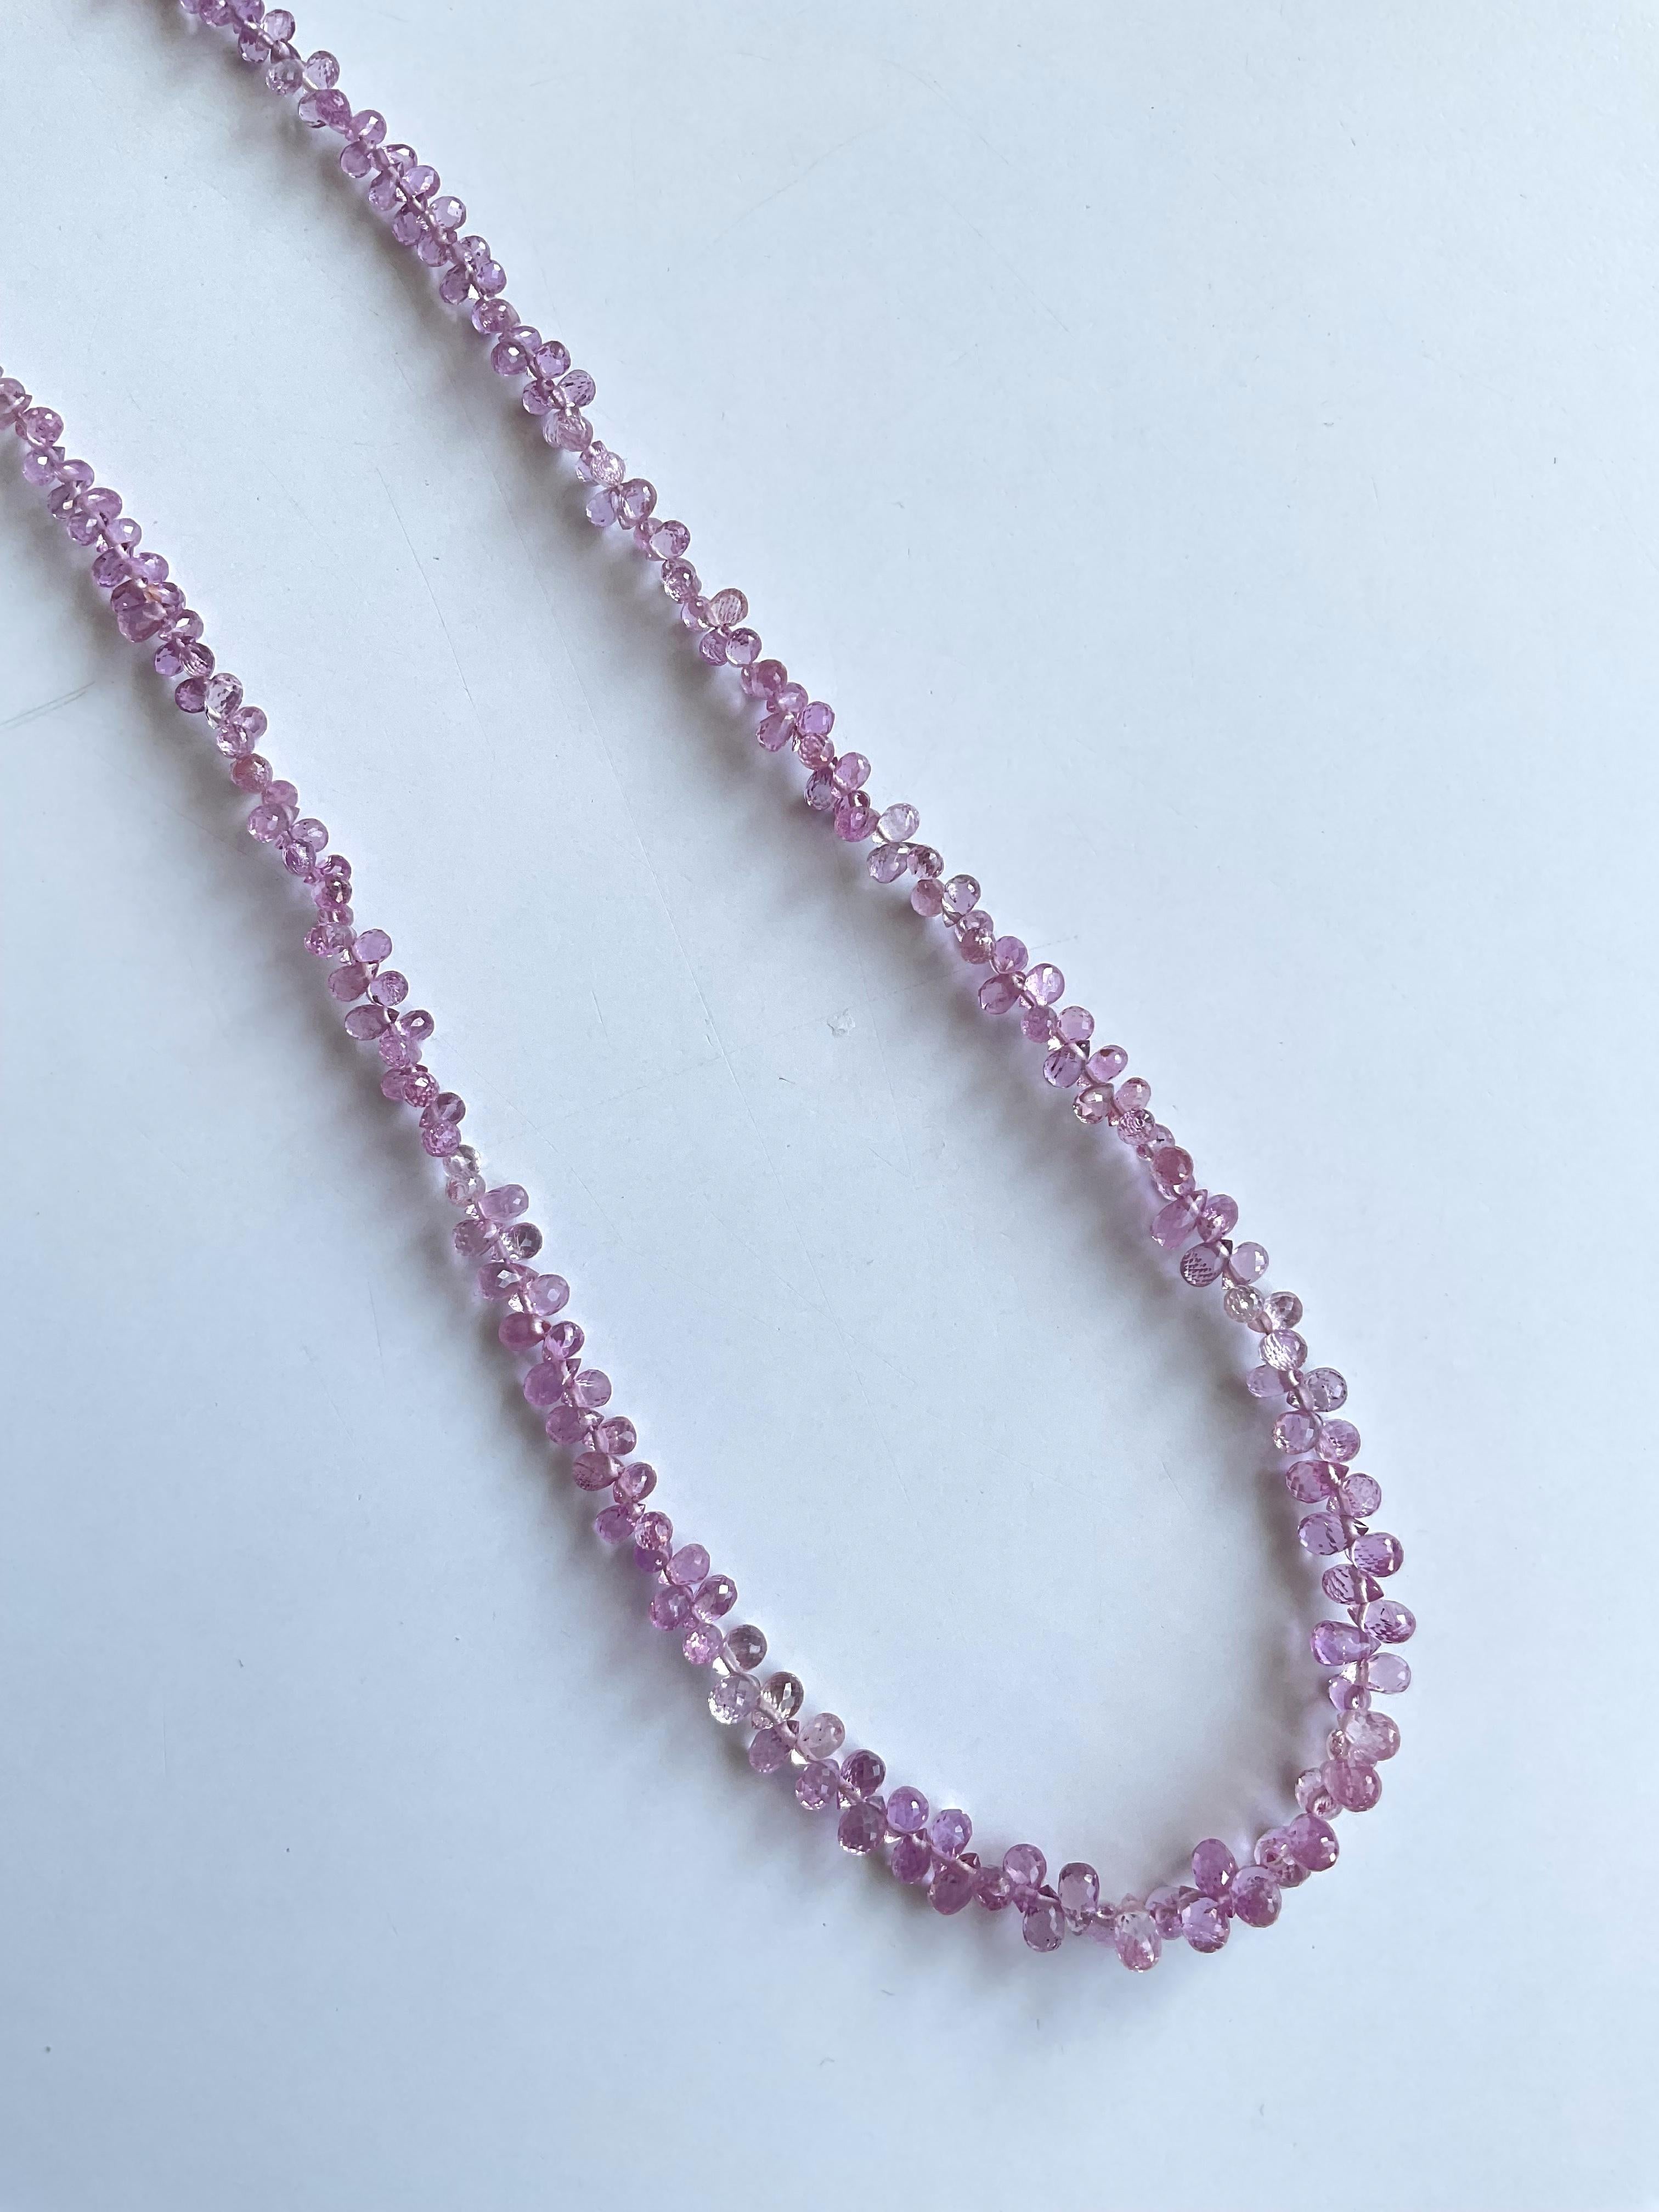 Bead 59.00 Carats Pink Sapphire Drops Top Quality Natural Gemstone For Fine Jewelry For Sale